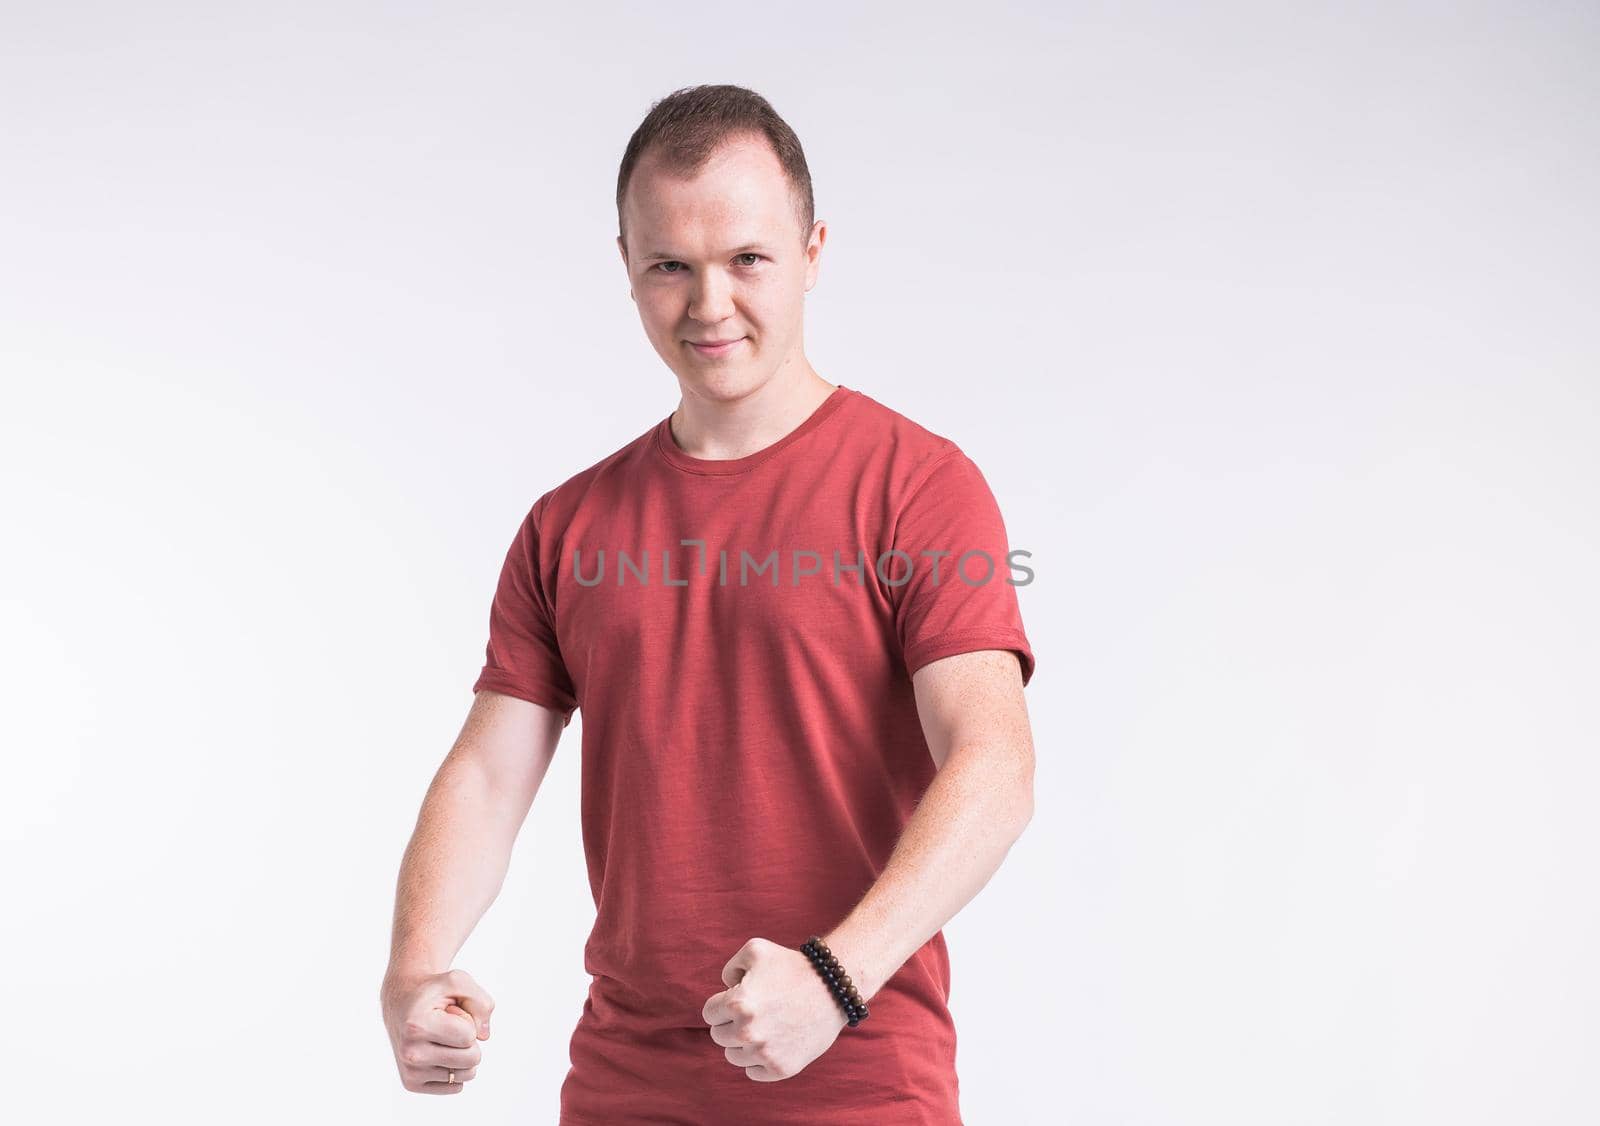 Attractive young man dancing, having fun on white background. Stylish outlook